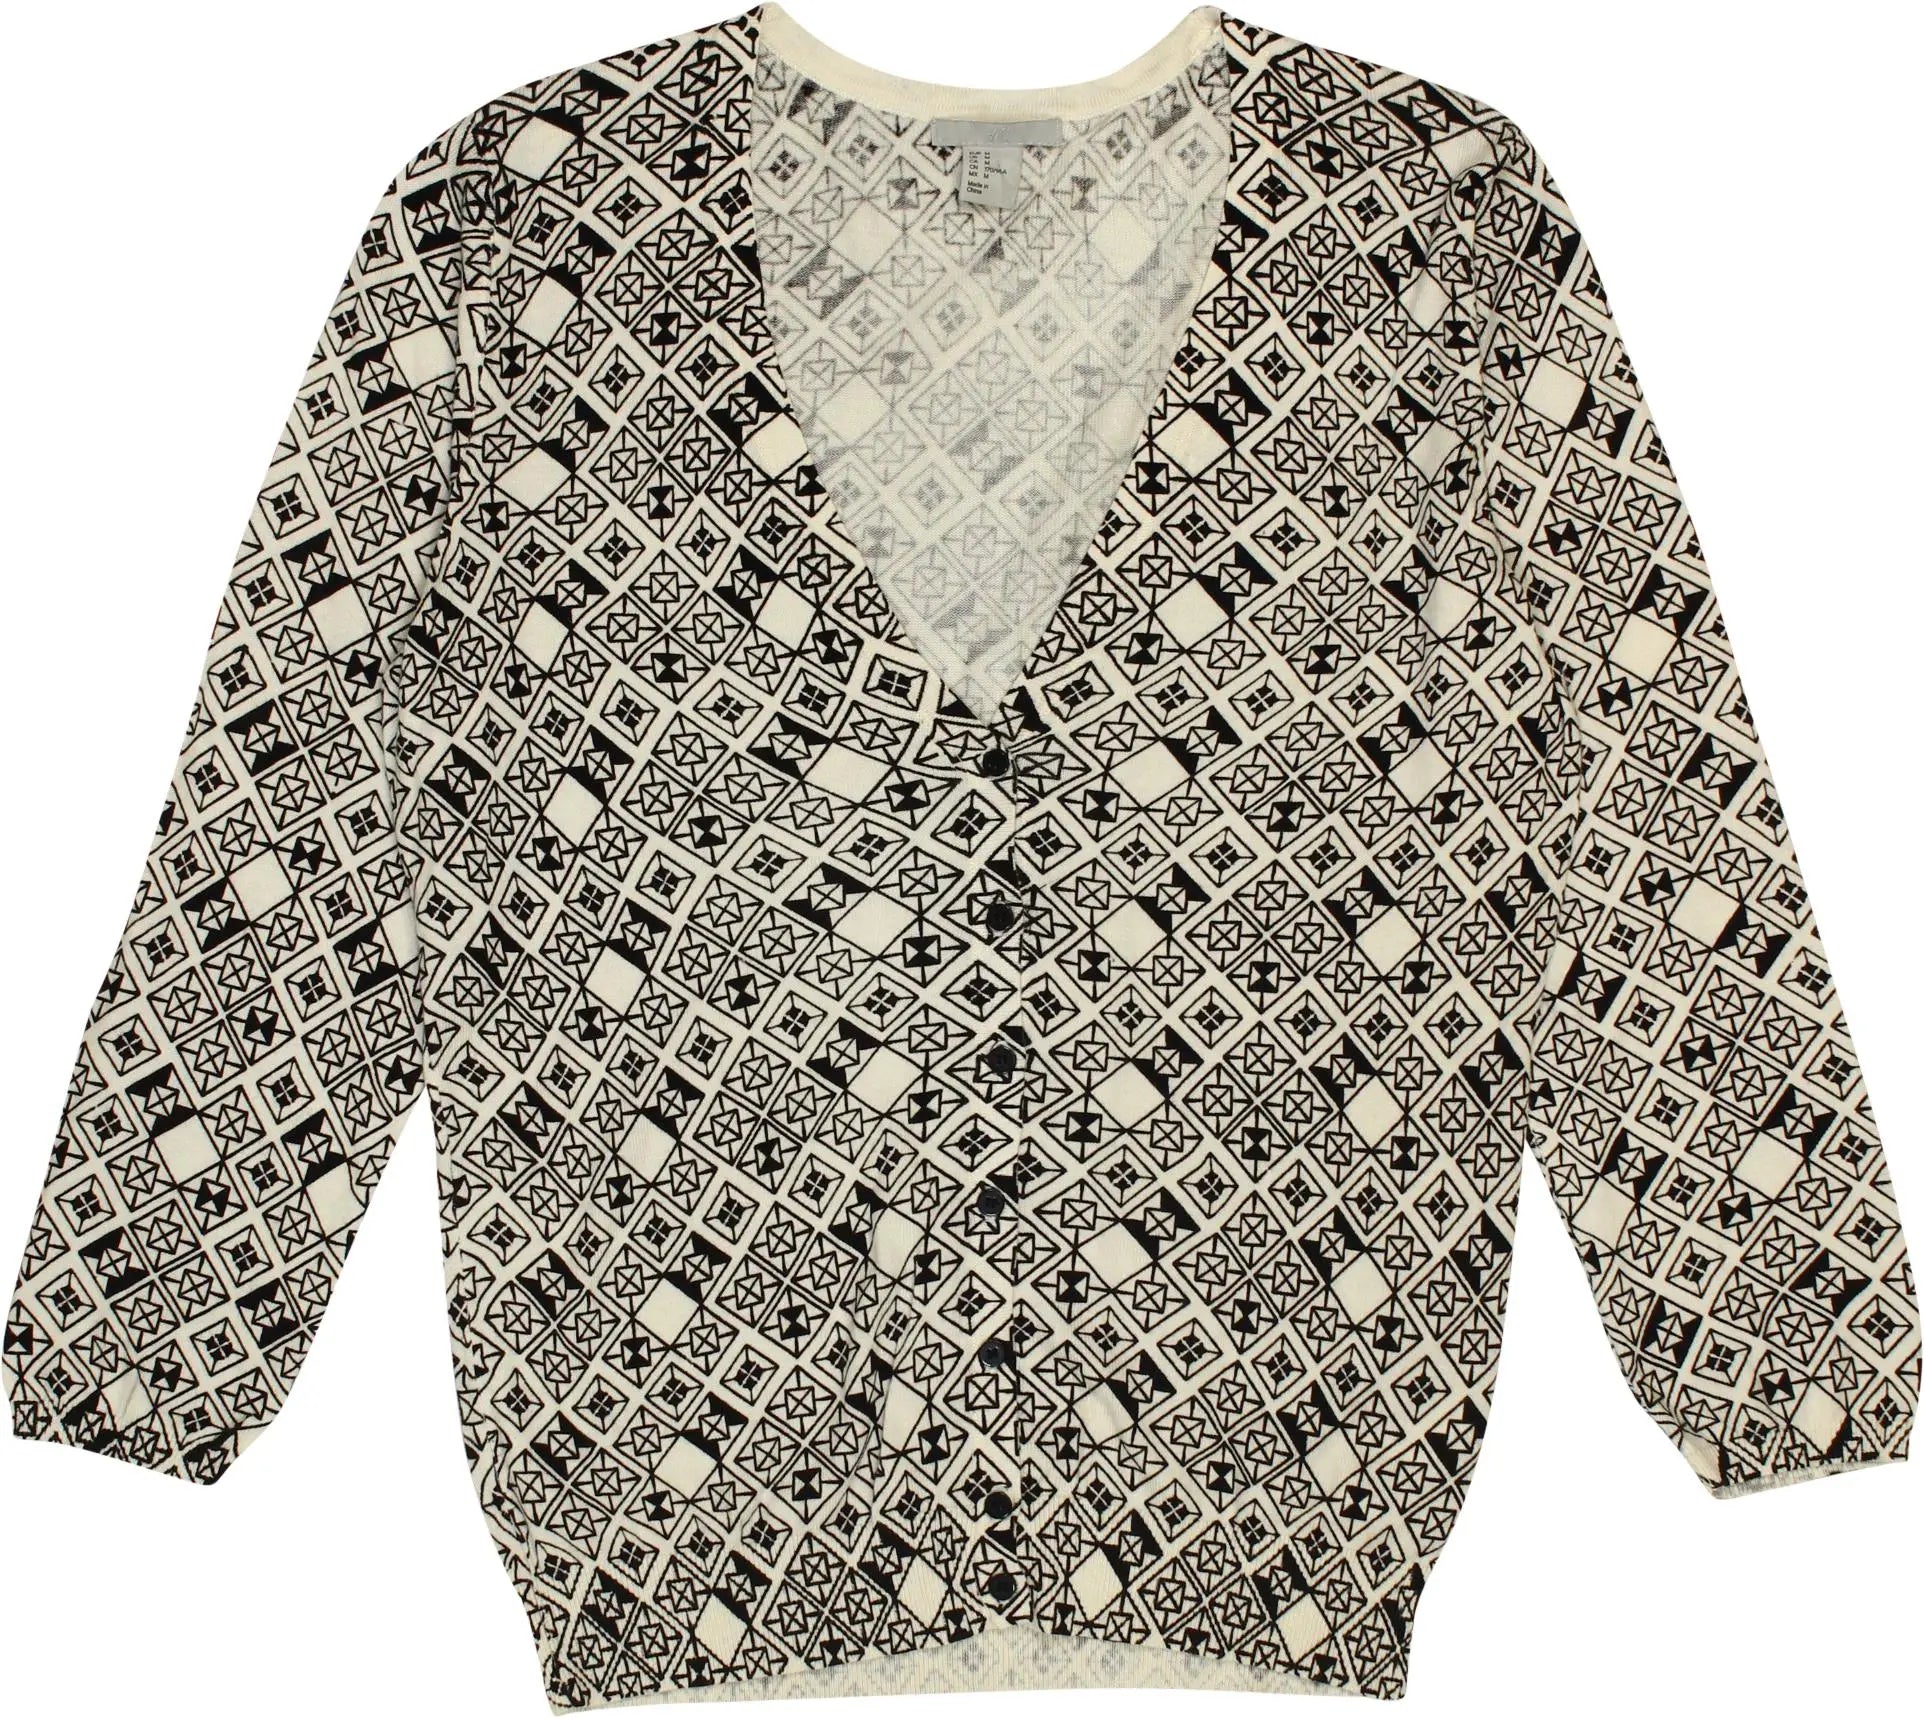 H&M - Patterned Cardigan by H&M- ThriftTale.com - Vintage and second handclothing